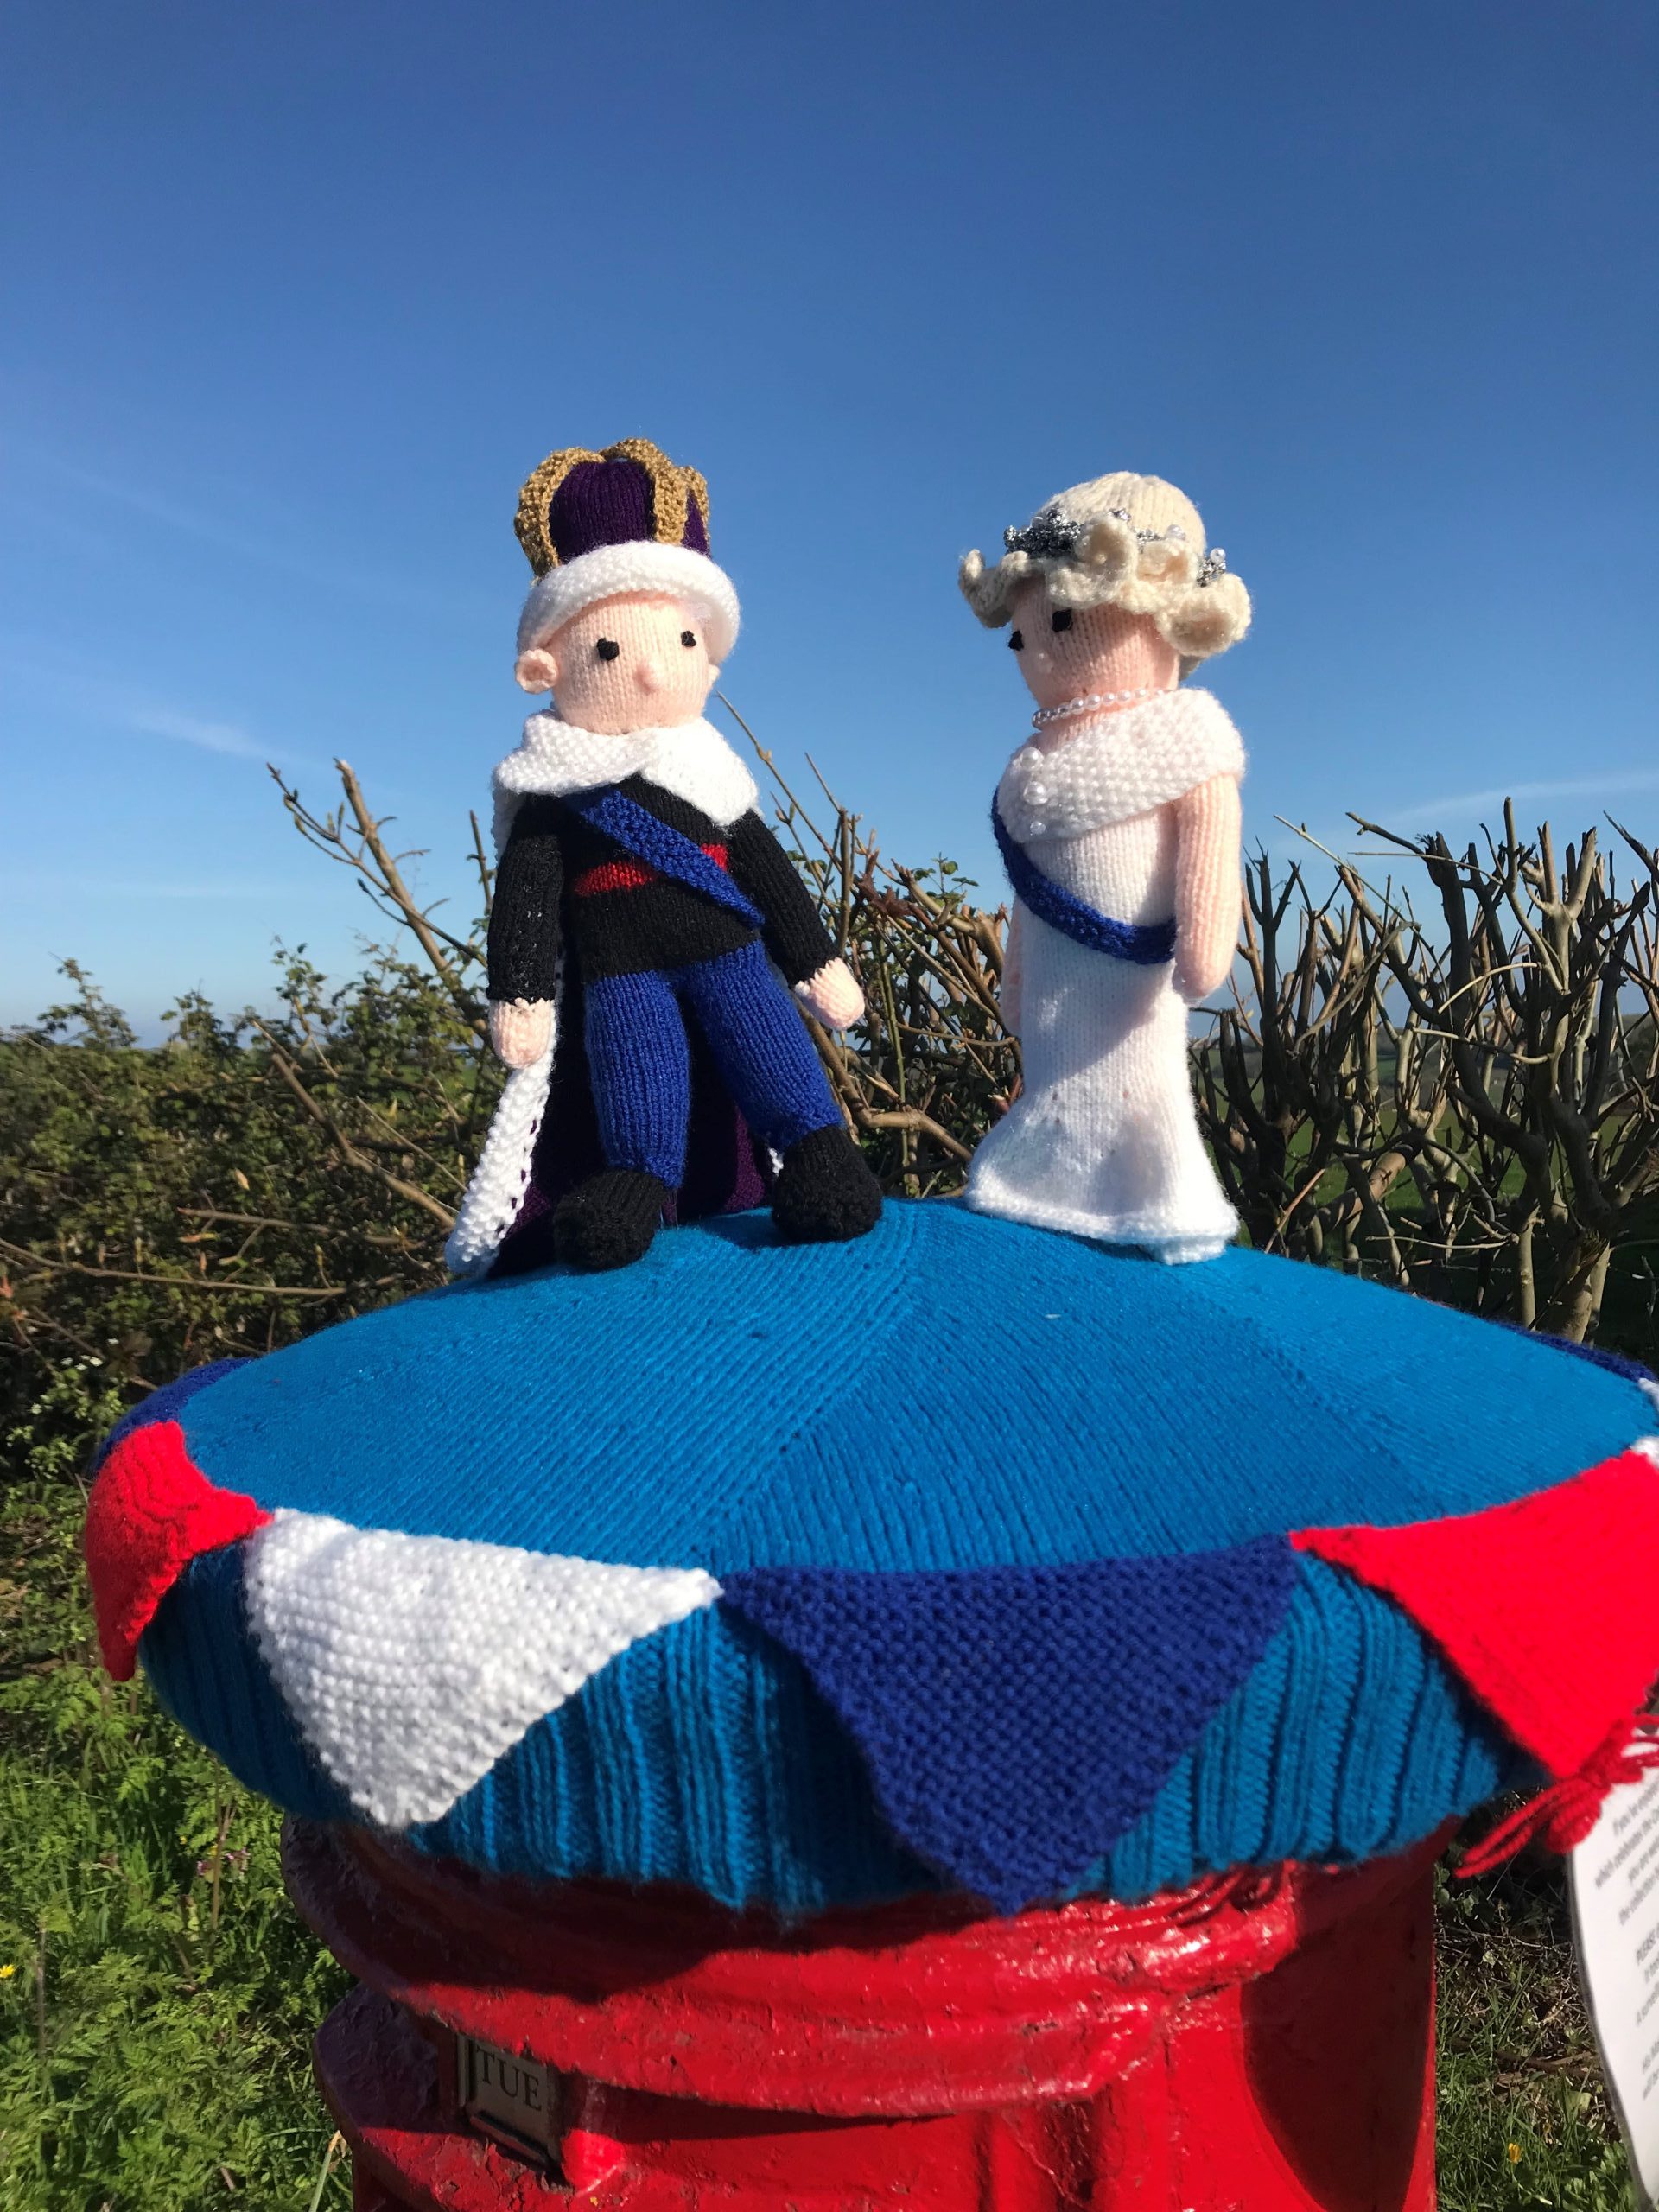 King Charles and Queen Camila knitted dolls for sale